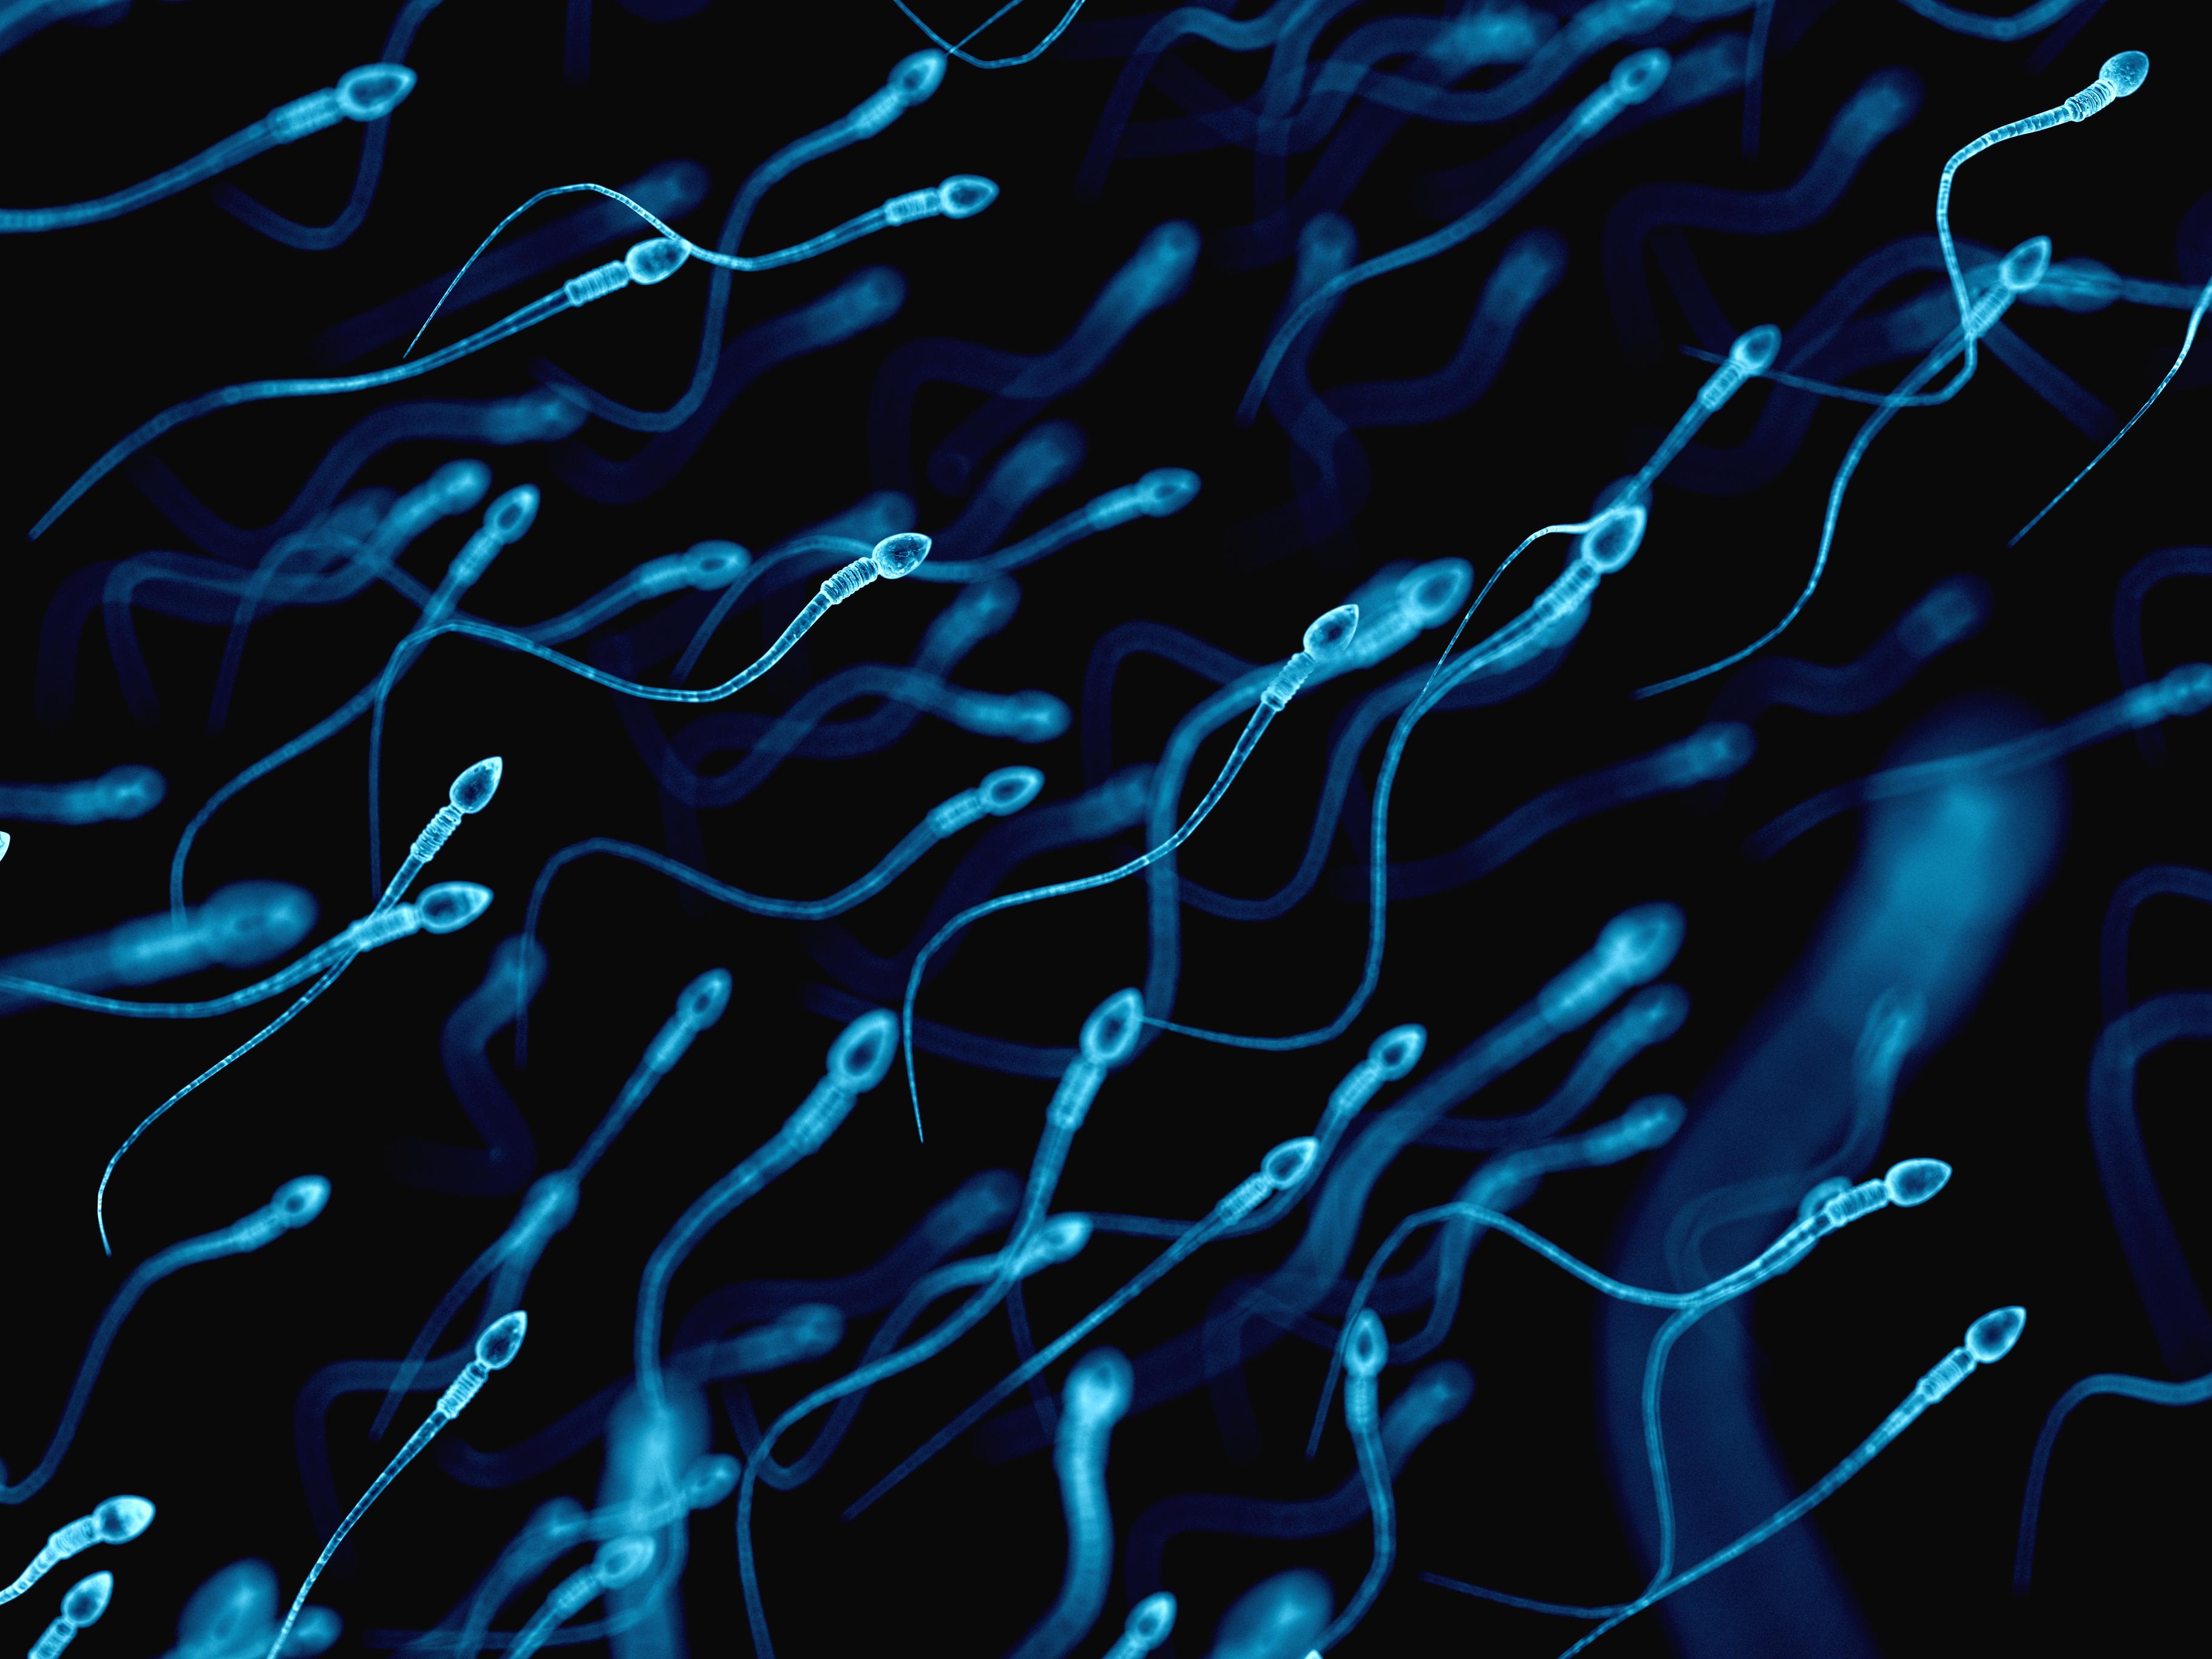 sperm colored blue swimming across a black background